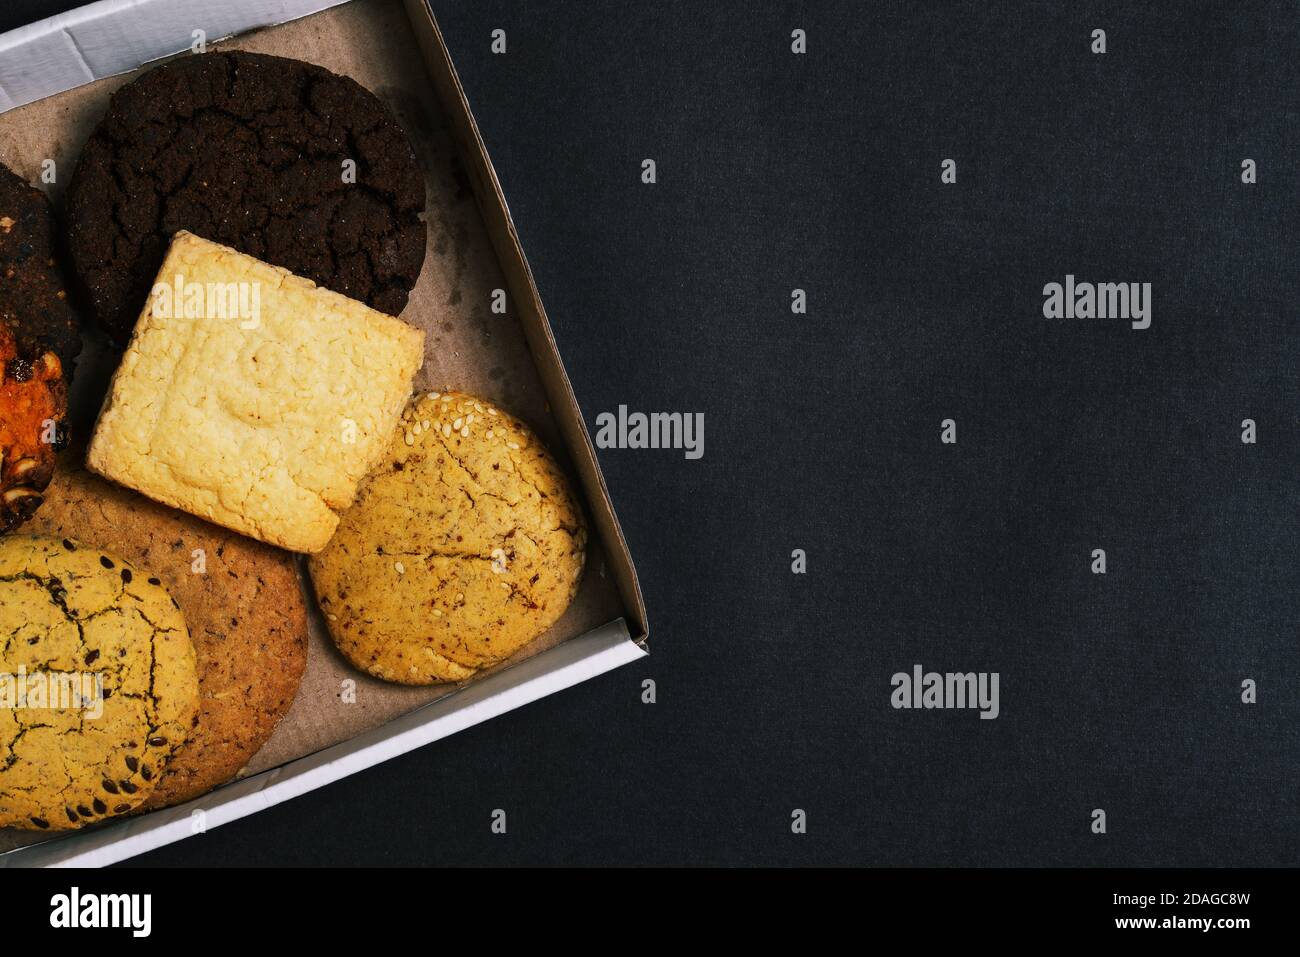 Sweet food. Homemade cakes of different types are packed in a cardboard box. Close-up of pastry baked goods with copy space Stock Photo